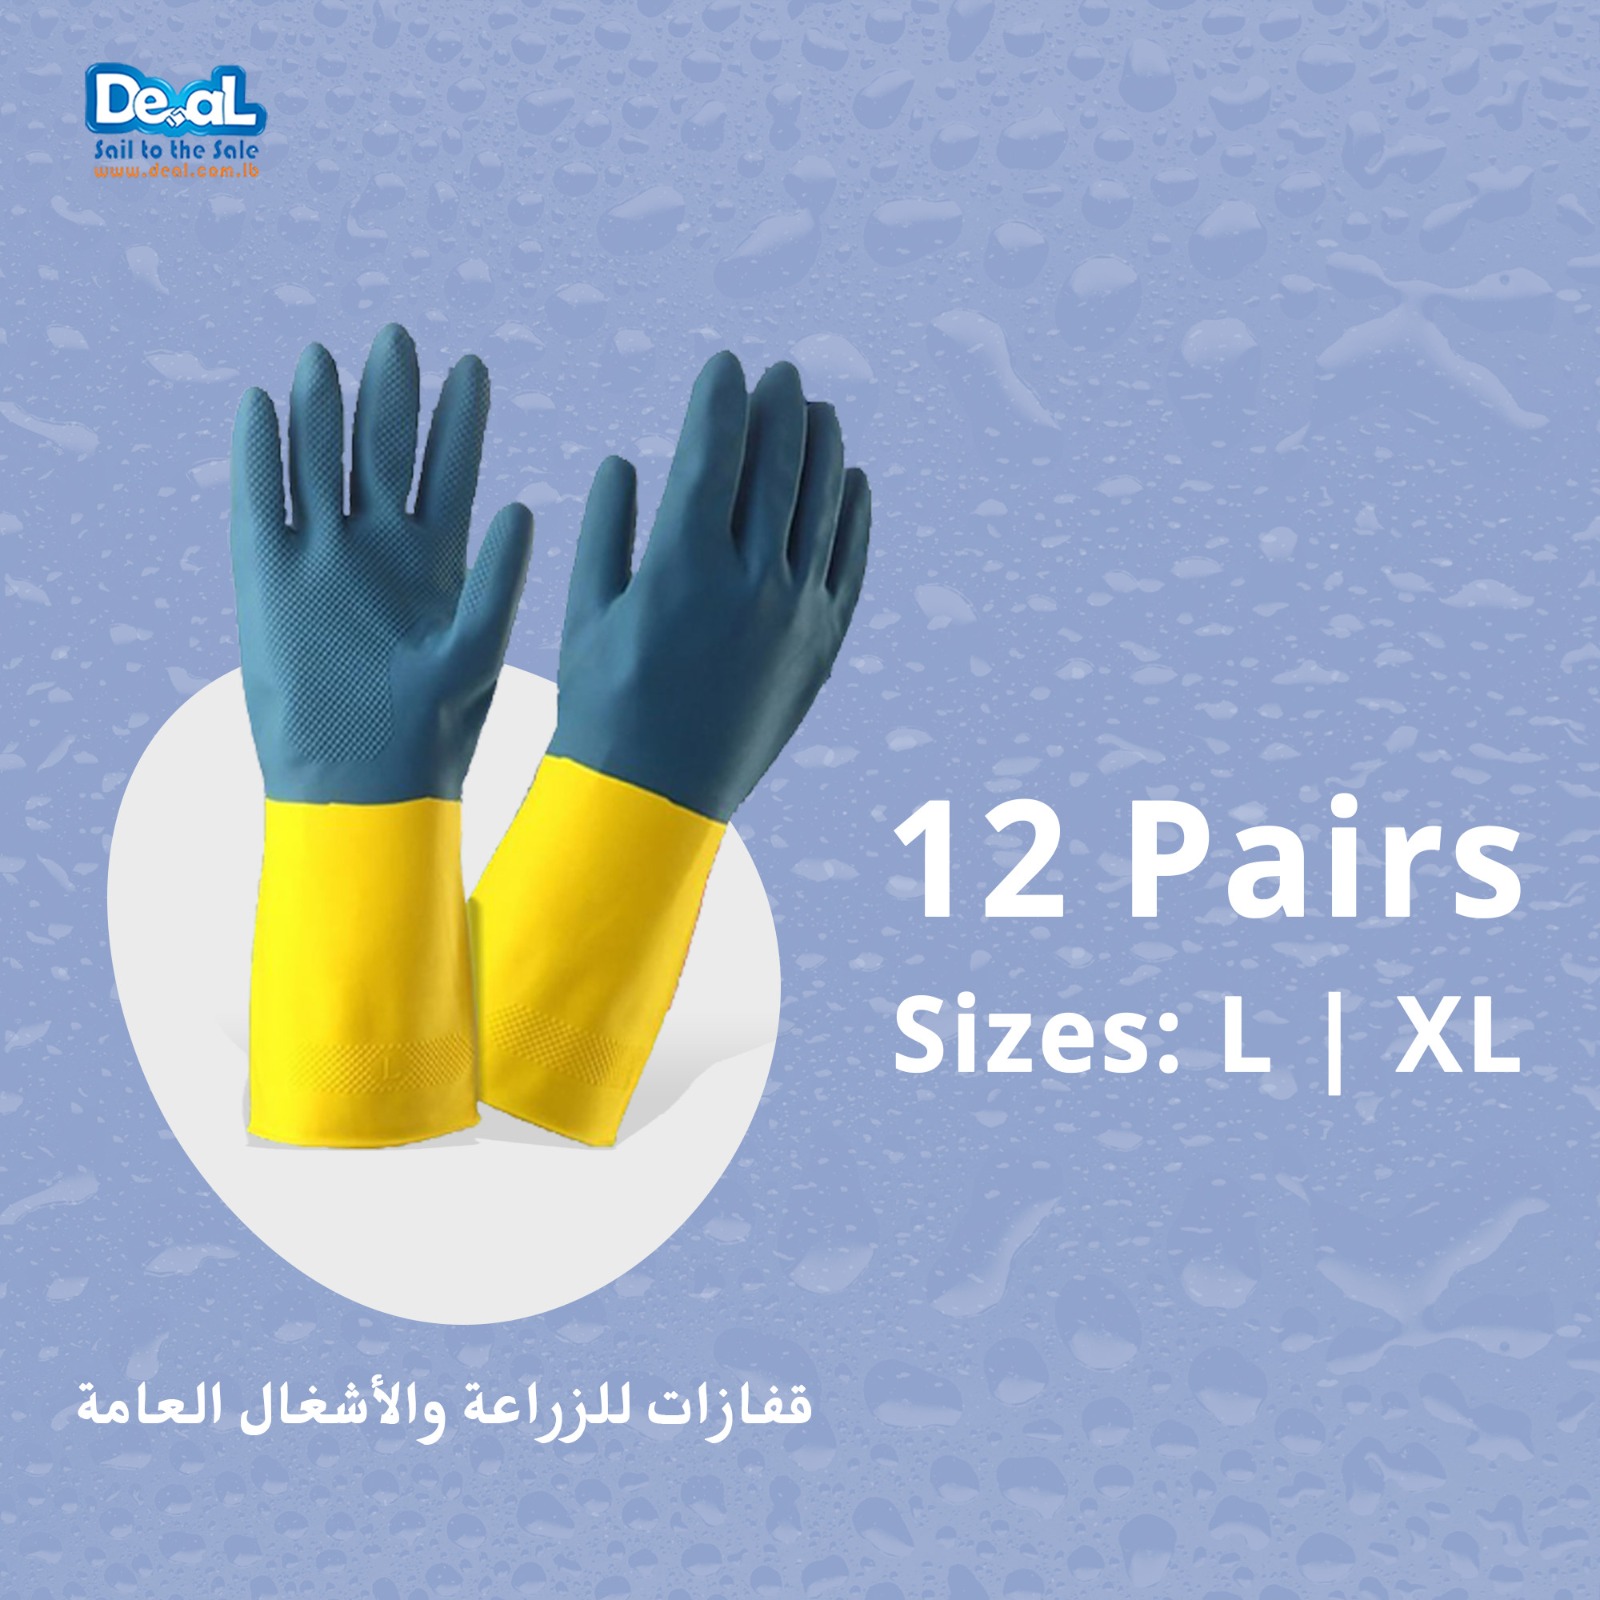 High+Quality+12+Pairs+Of+Garden+Gloves